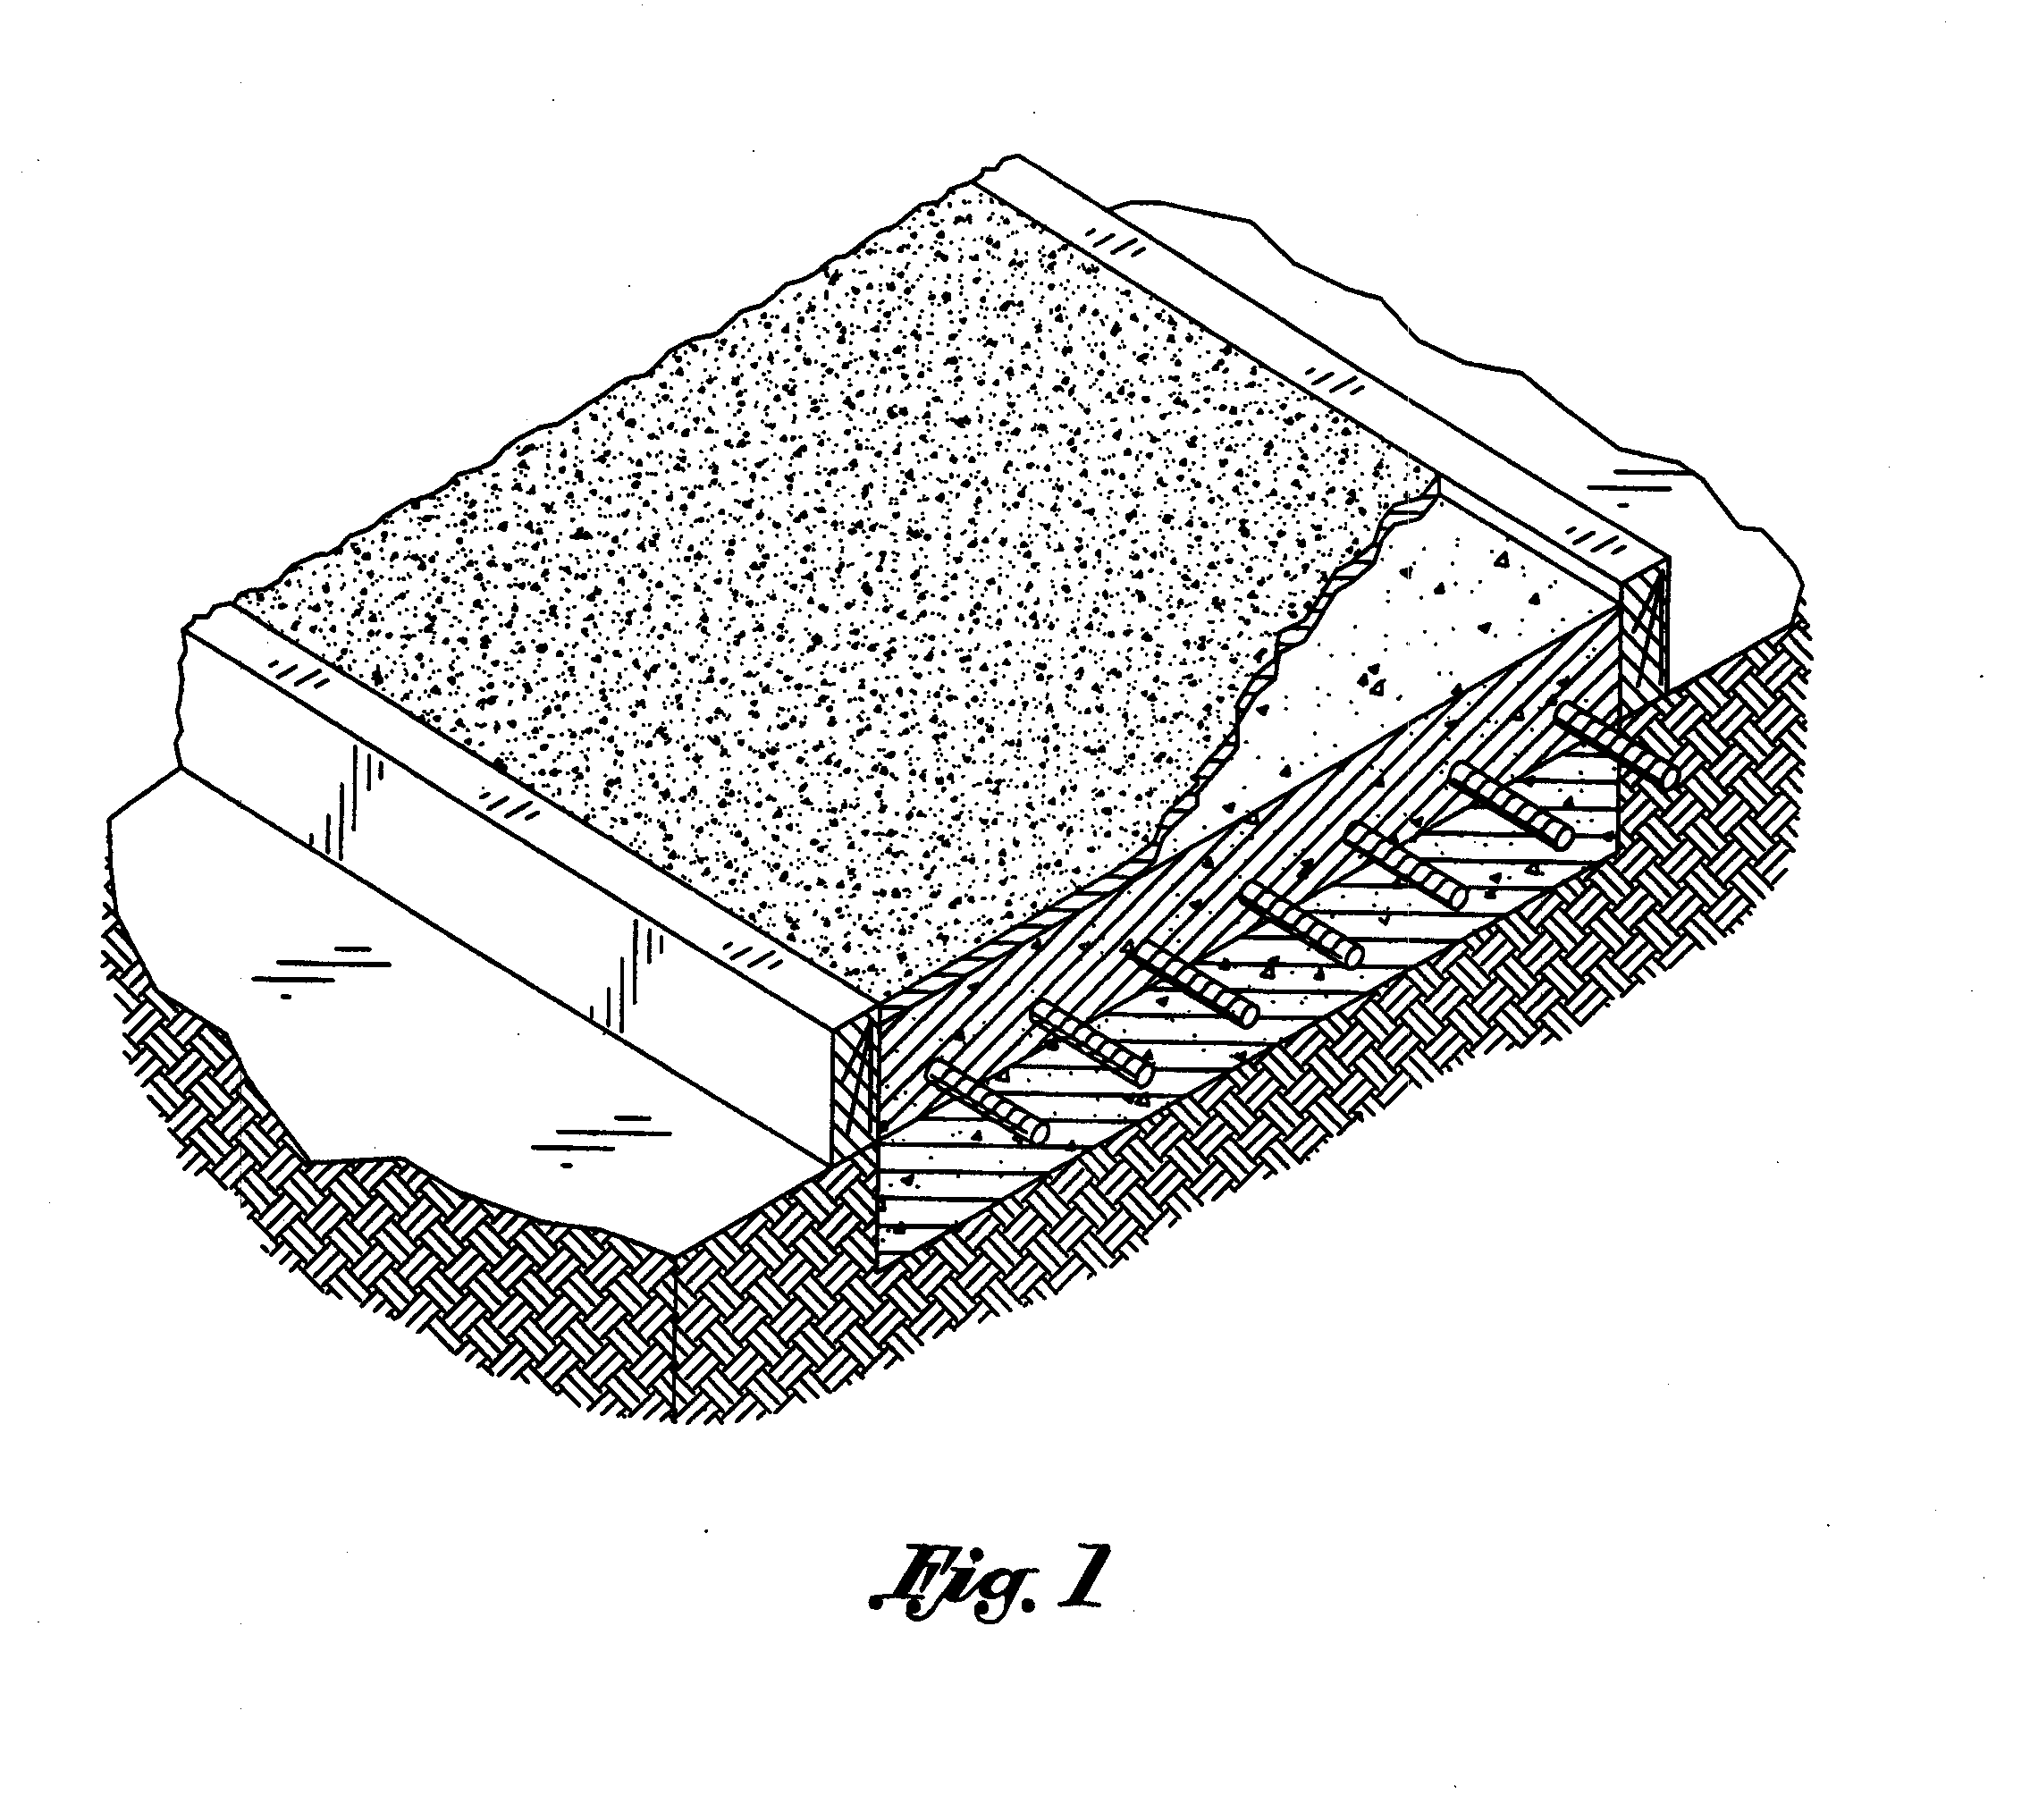 Architectural concrete and method of forming the same